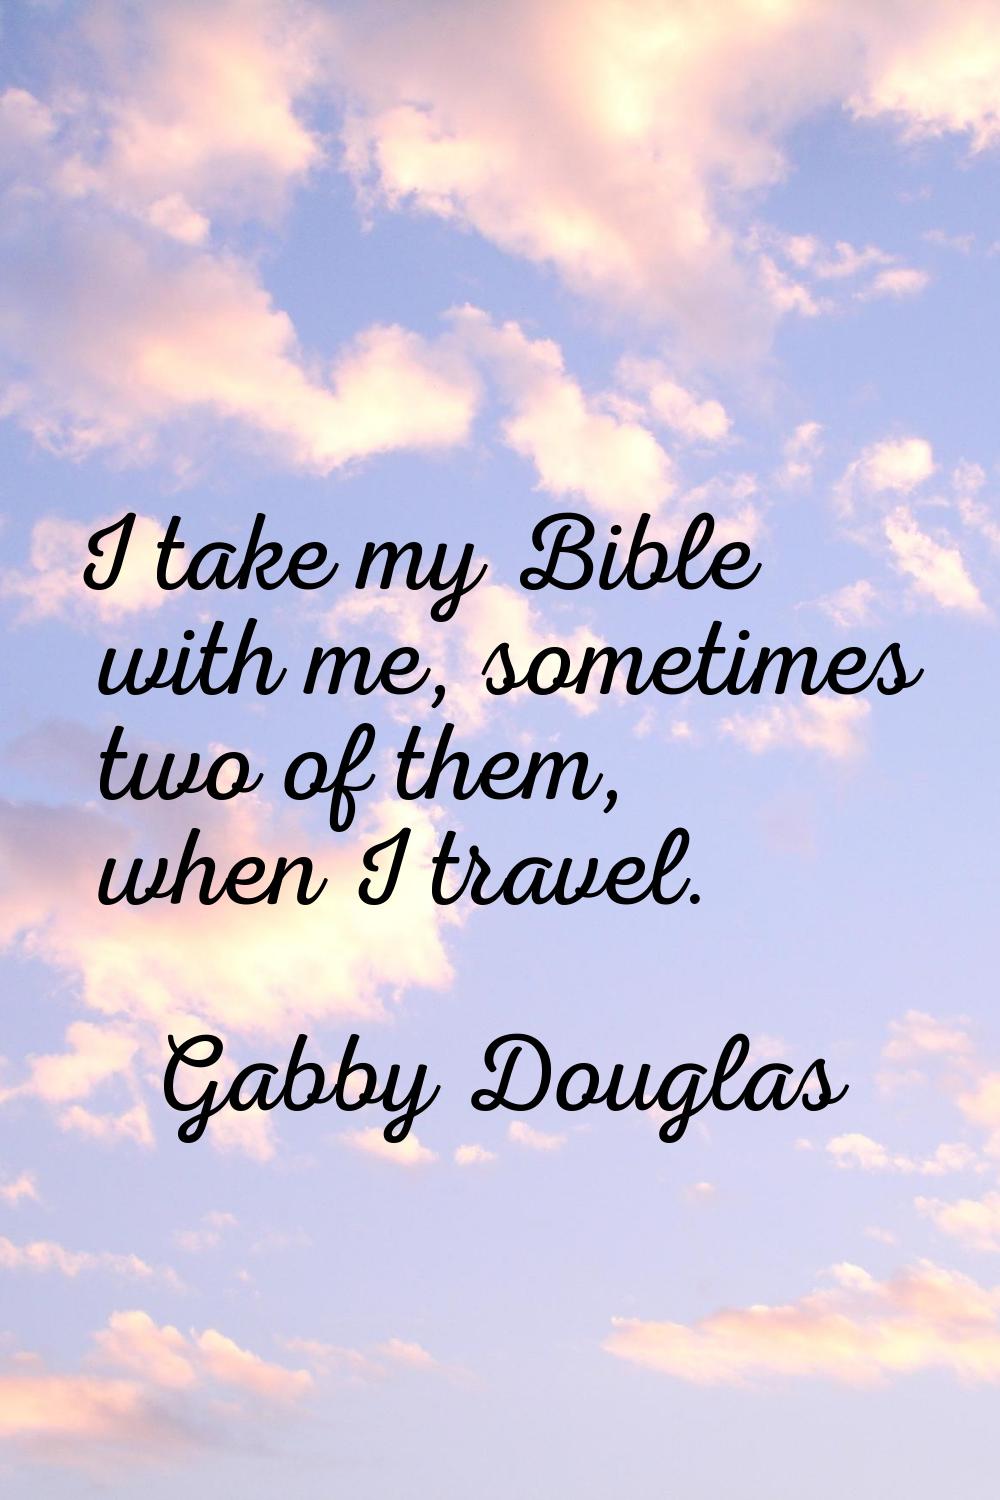 I take my Bible with me, sometimes two of them, when I travel.